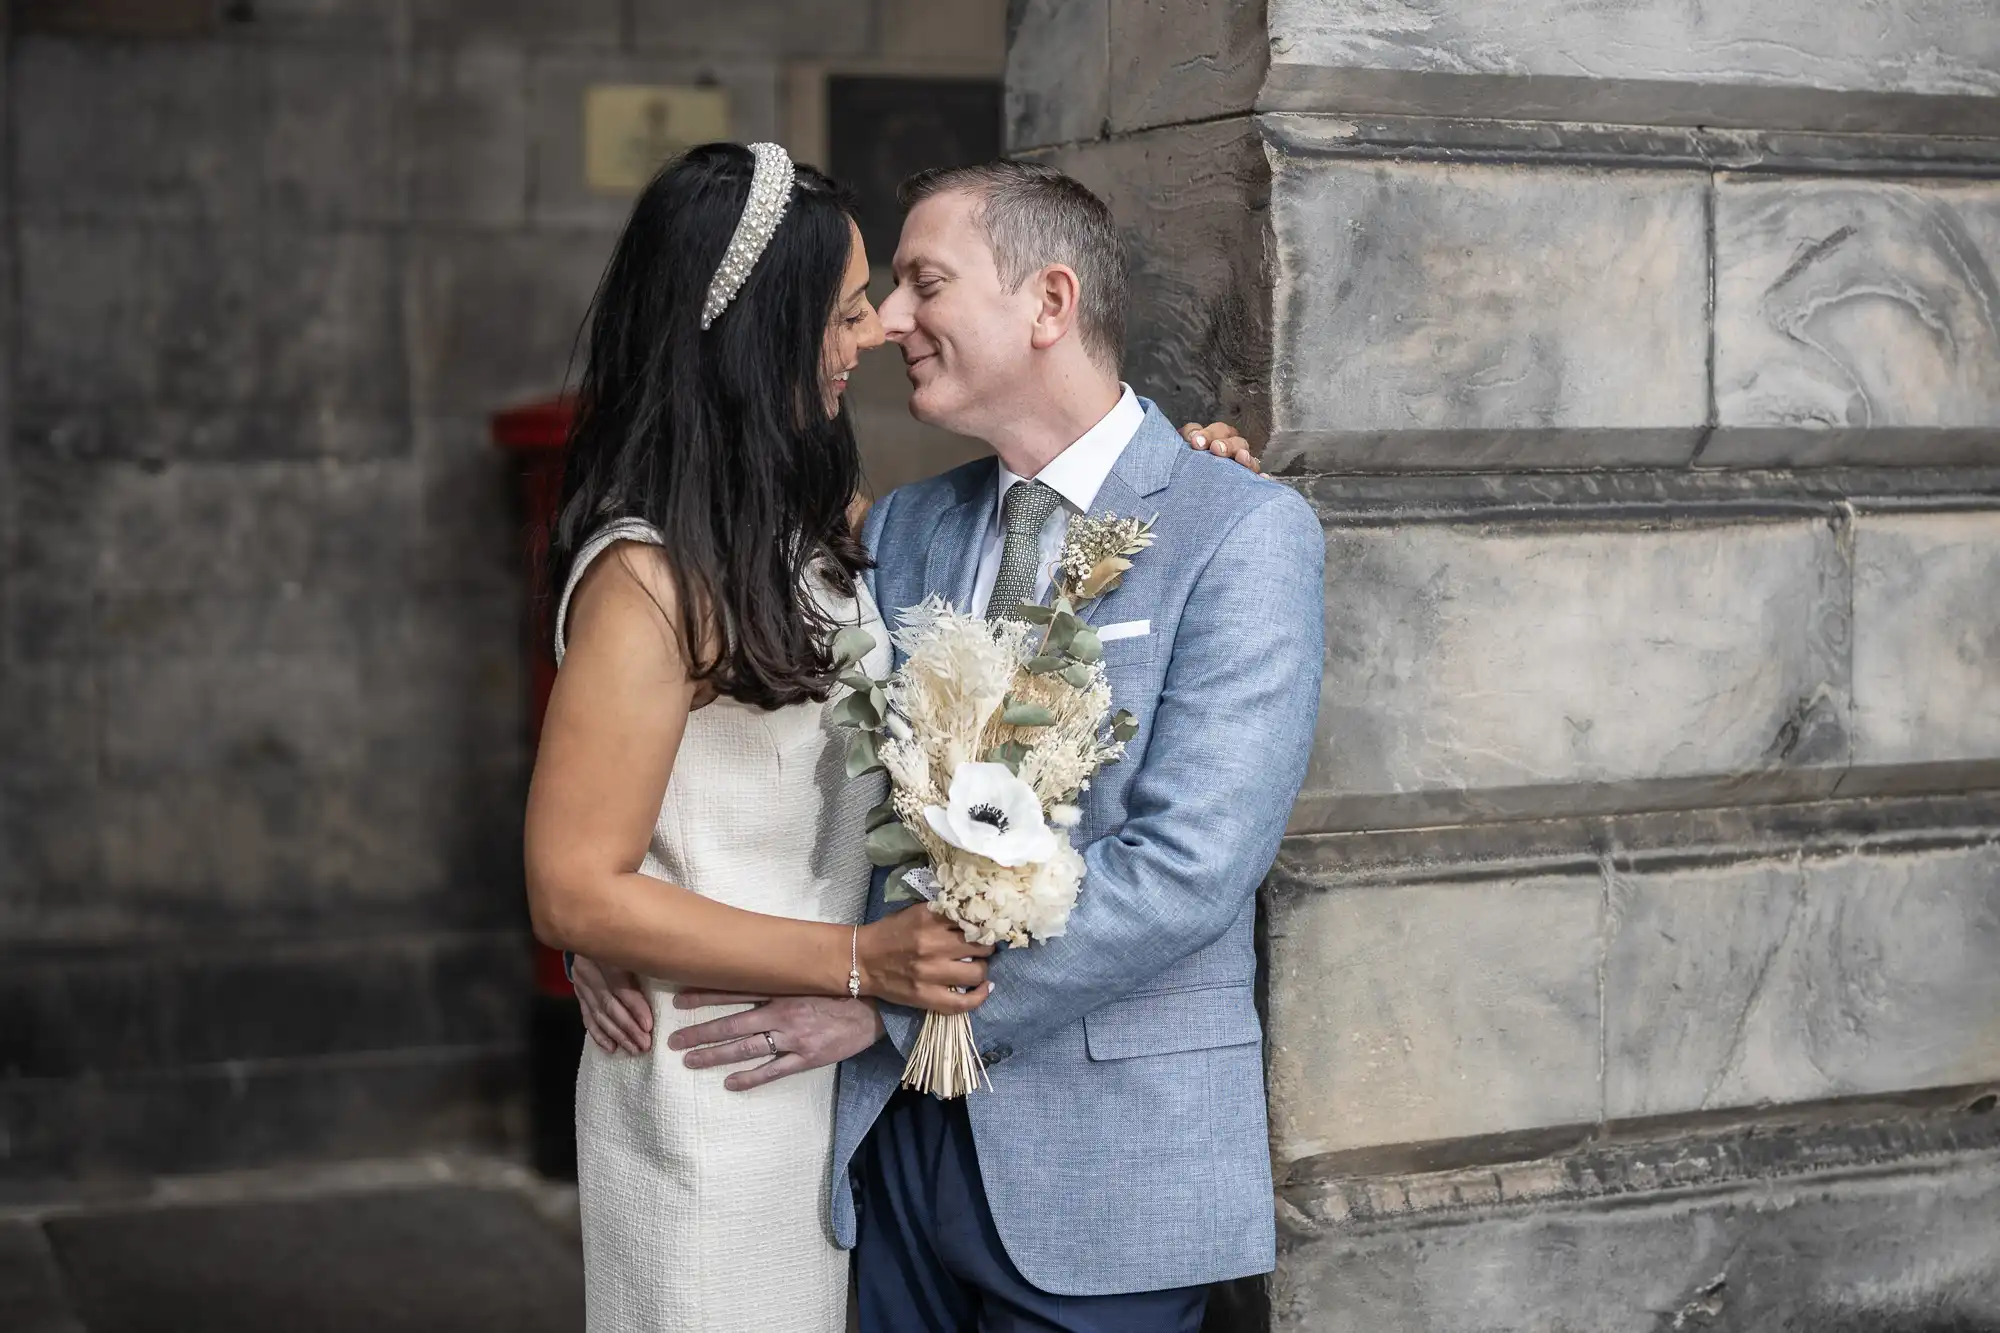 A couple in wedding attire embraces by a stone wall, the woman holding a bouquet of white and beige flowers.